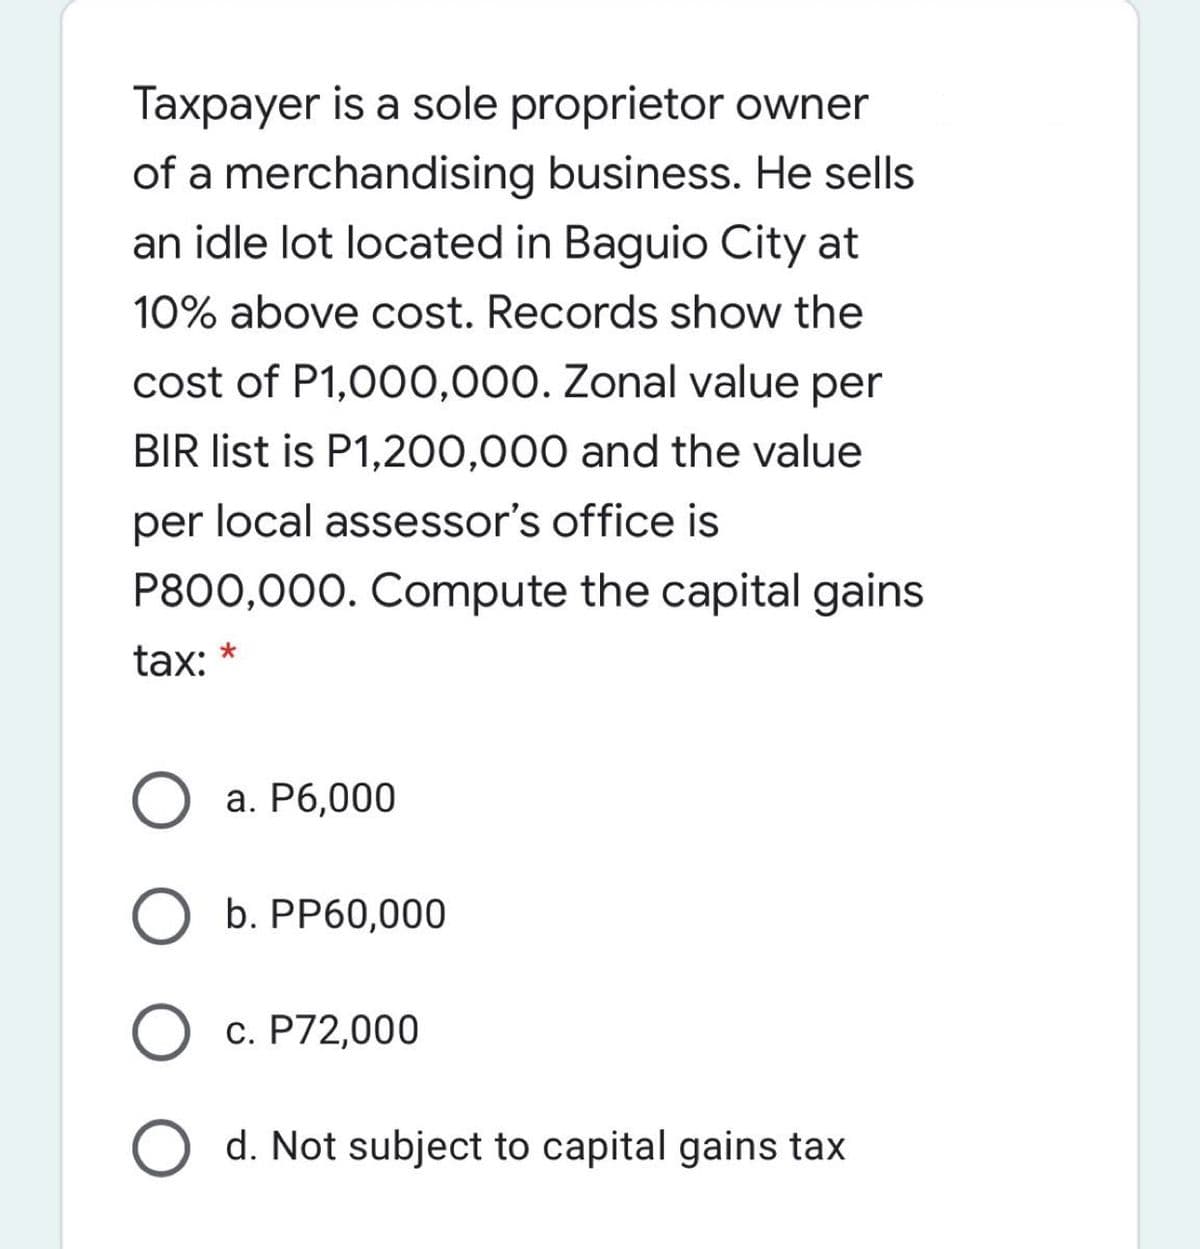 Taxpayer is a sole proprietor owner
of a merchandising business. He sells
an idle lot located in Baguio City at
10% above cost. Records show the
cost of P1,000,000. Zonal value per
BIR list is P1,200,000 and the value
per local assessor's office is
P800,000. Compute the capital gains
tax: *
a. P6,000
b. PP60,000
O c. P72,000
O d. Not subject to capital gains tax
